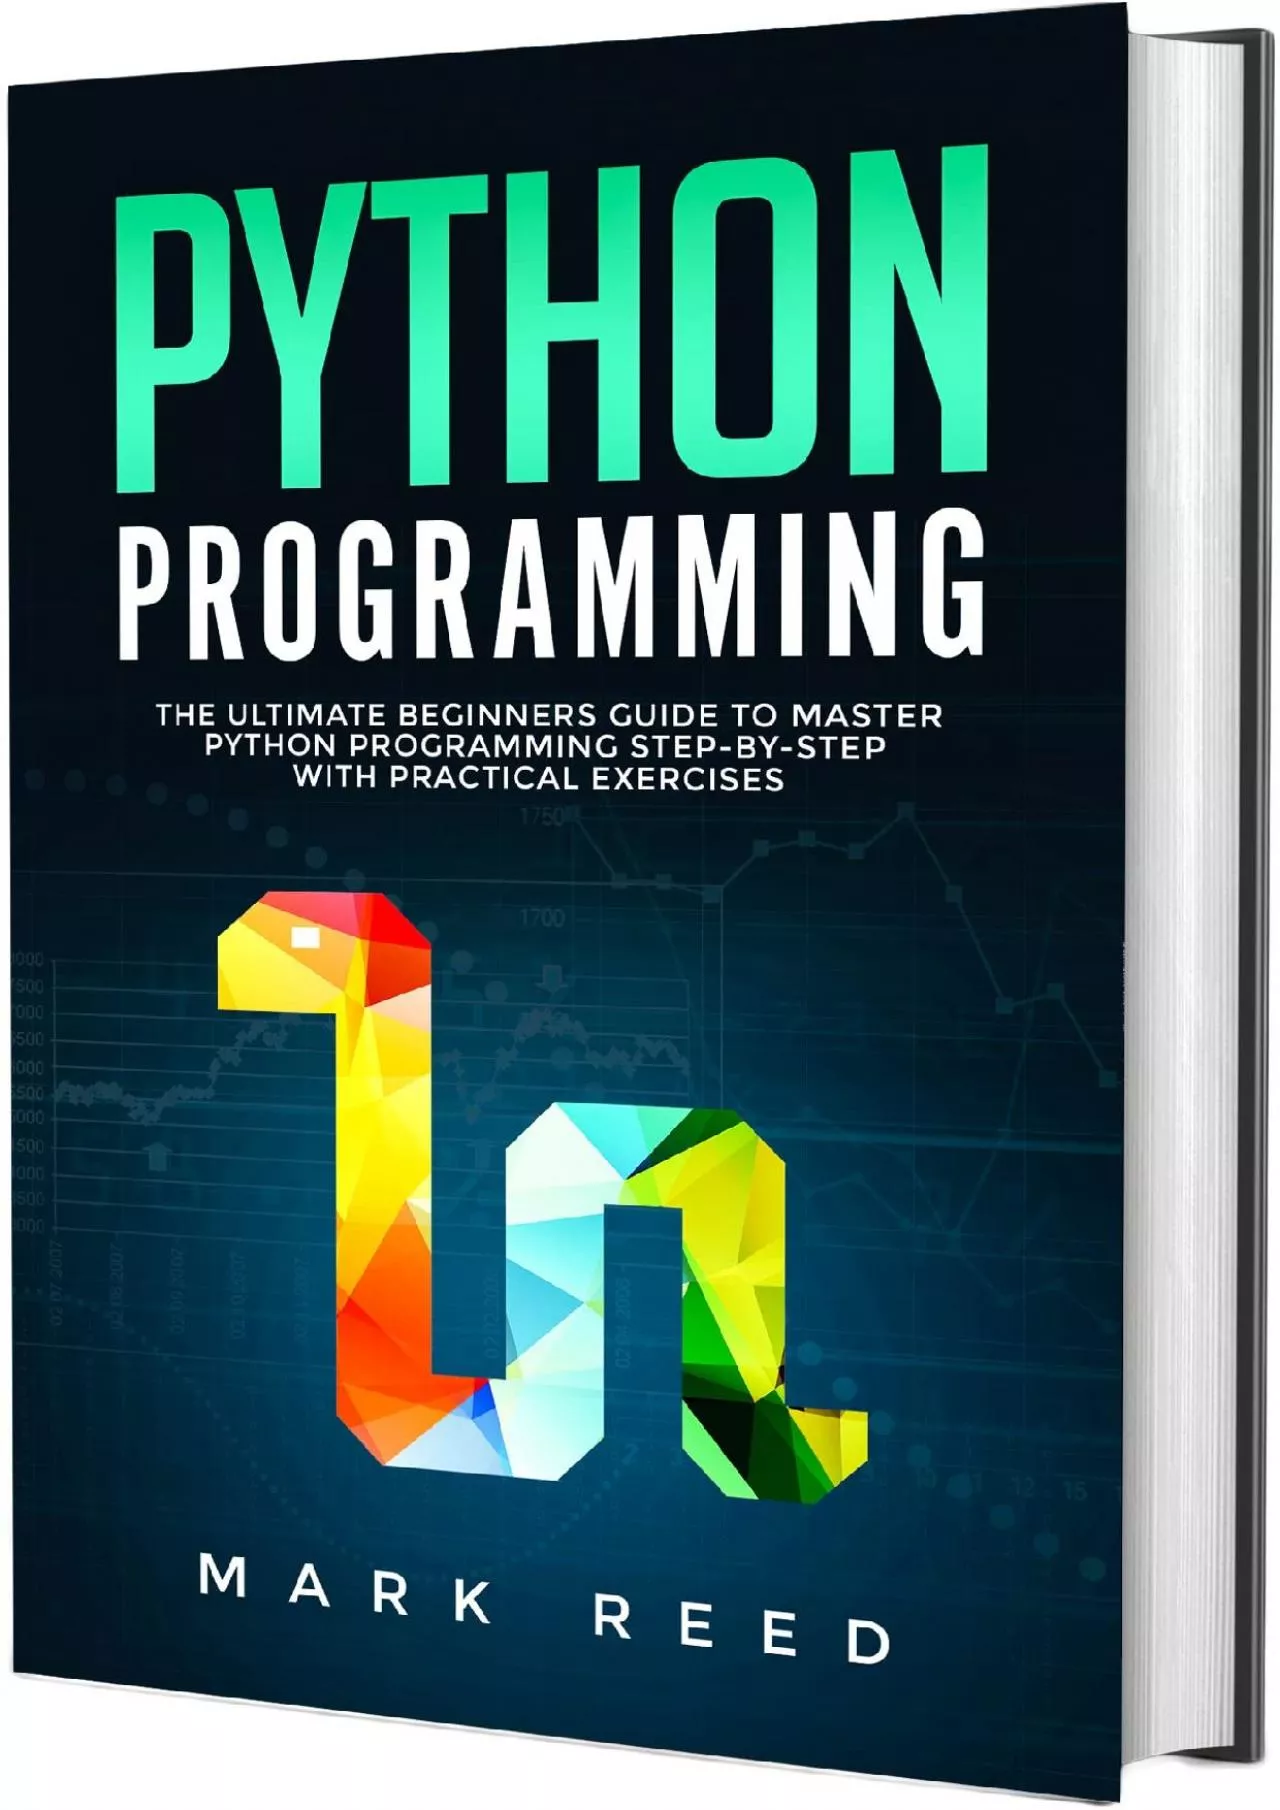 [FREE]-Python Programming: The Ultimate Beginners Guide to Master Python Programming Step-by-Step